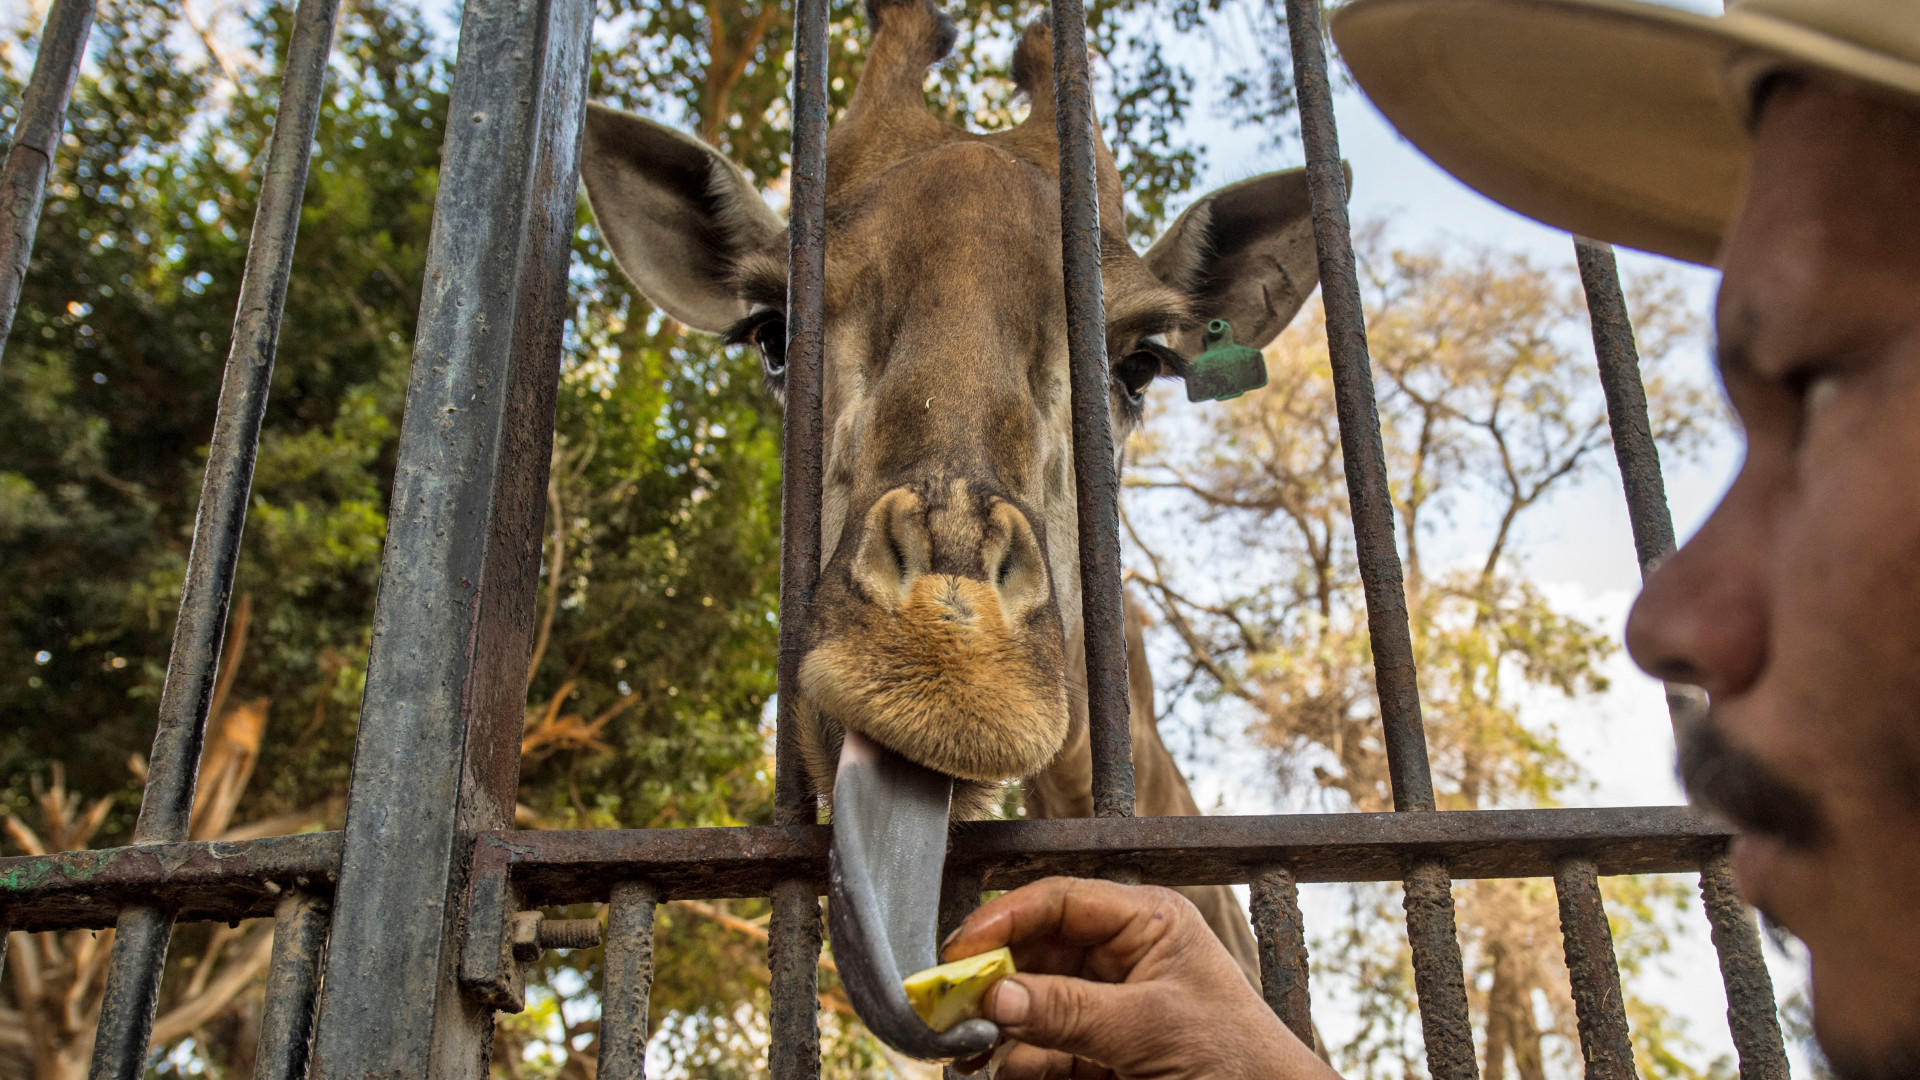 An Egyptian zoo keeper feeds a giraffe at Giza Zoo in Cairo, on 20 February 2019 (AFP)